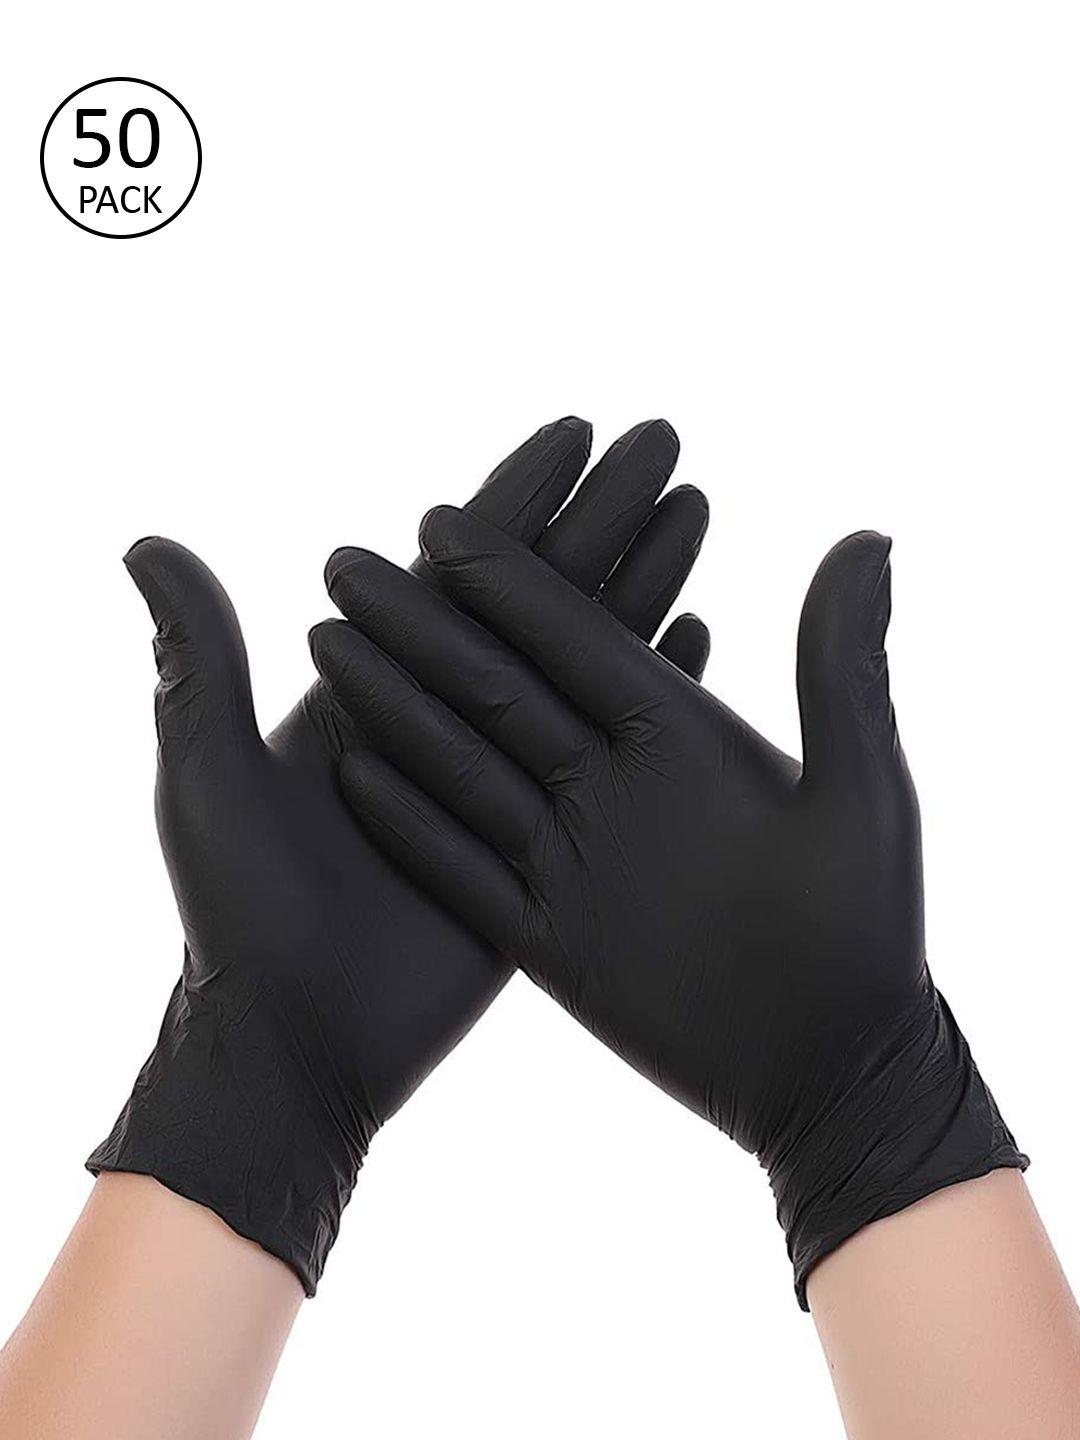 london fashion hob unisex pack of 50 black solid surgical disposable hand gloves